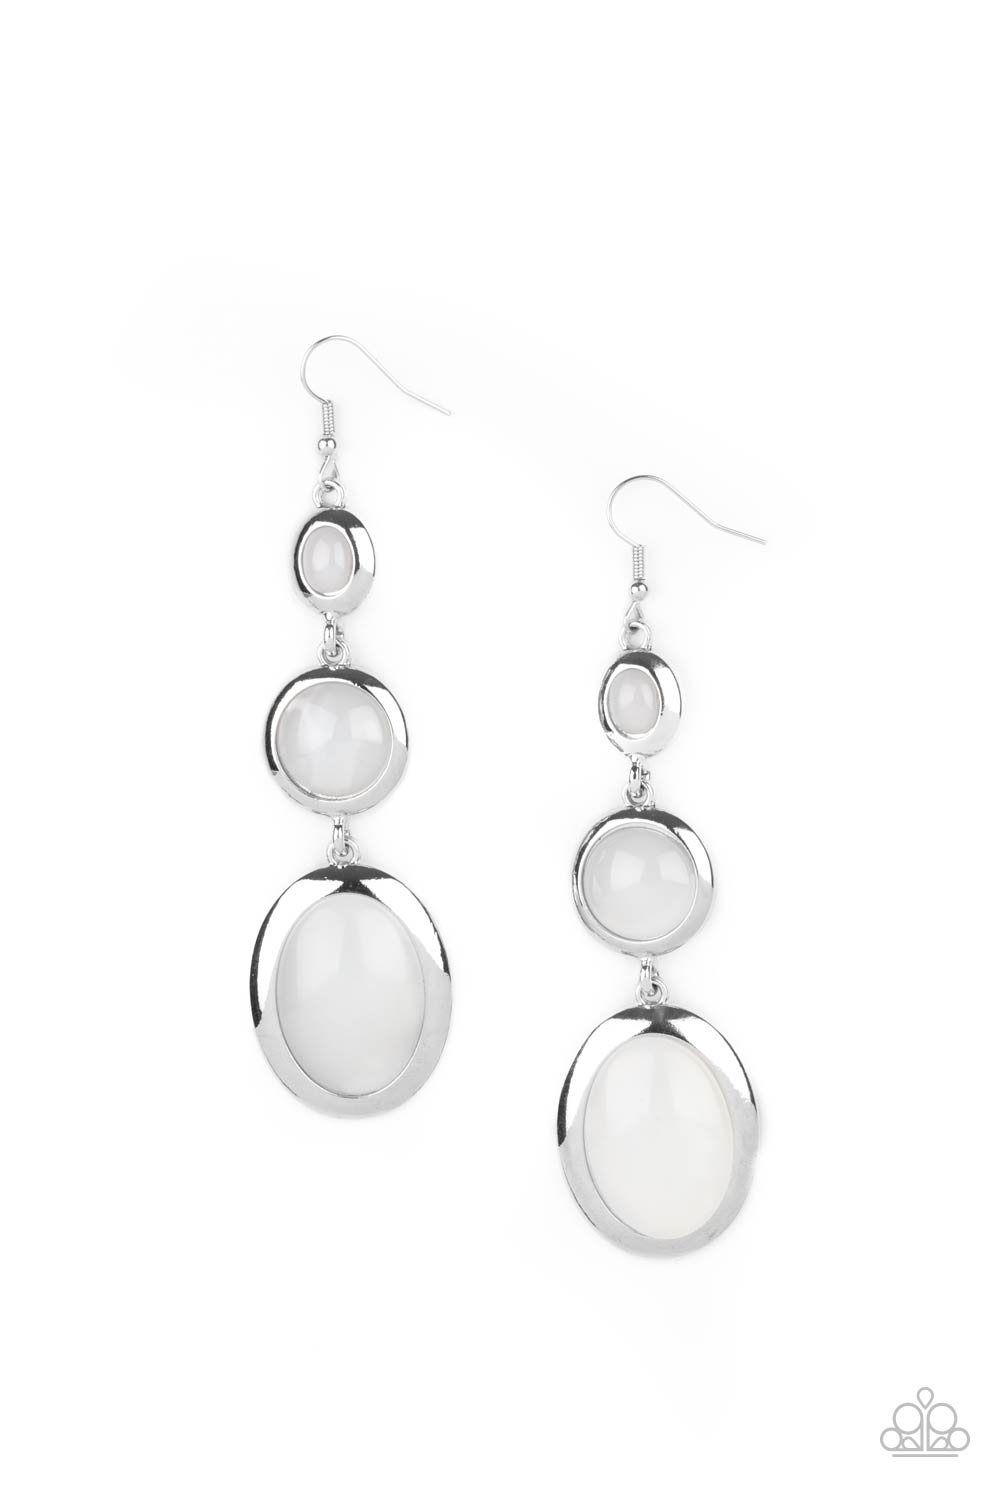 Retro Reality Cloudy White Earrings - Paparazzi Accessories- lightbox - CarasShop.com - $5 Jewelry by Cara Jewels